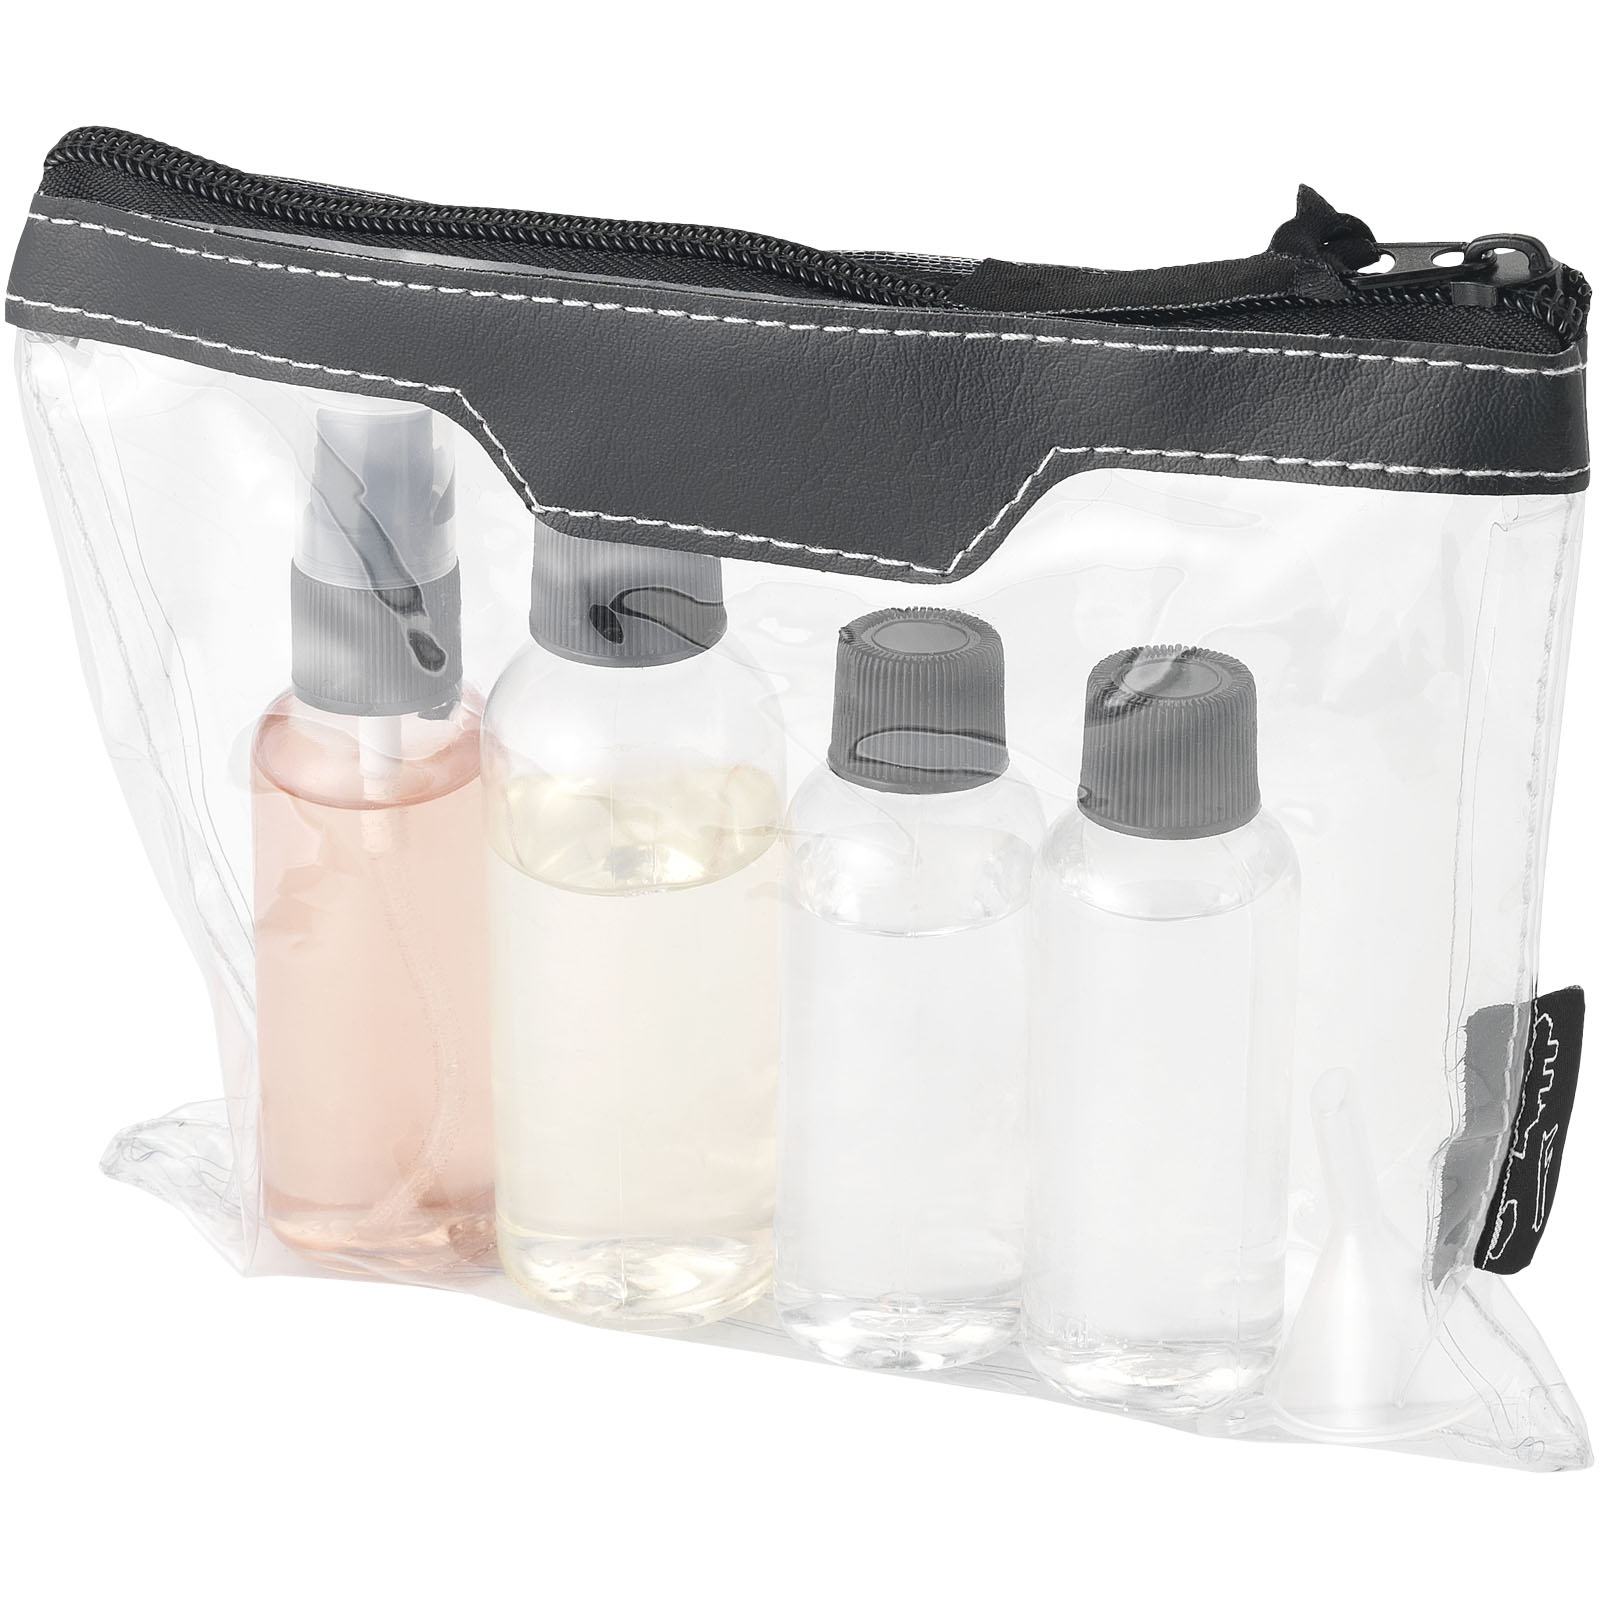 Advertising Travel Accessories - Munich airline approved travel bottle set - 5